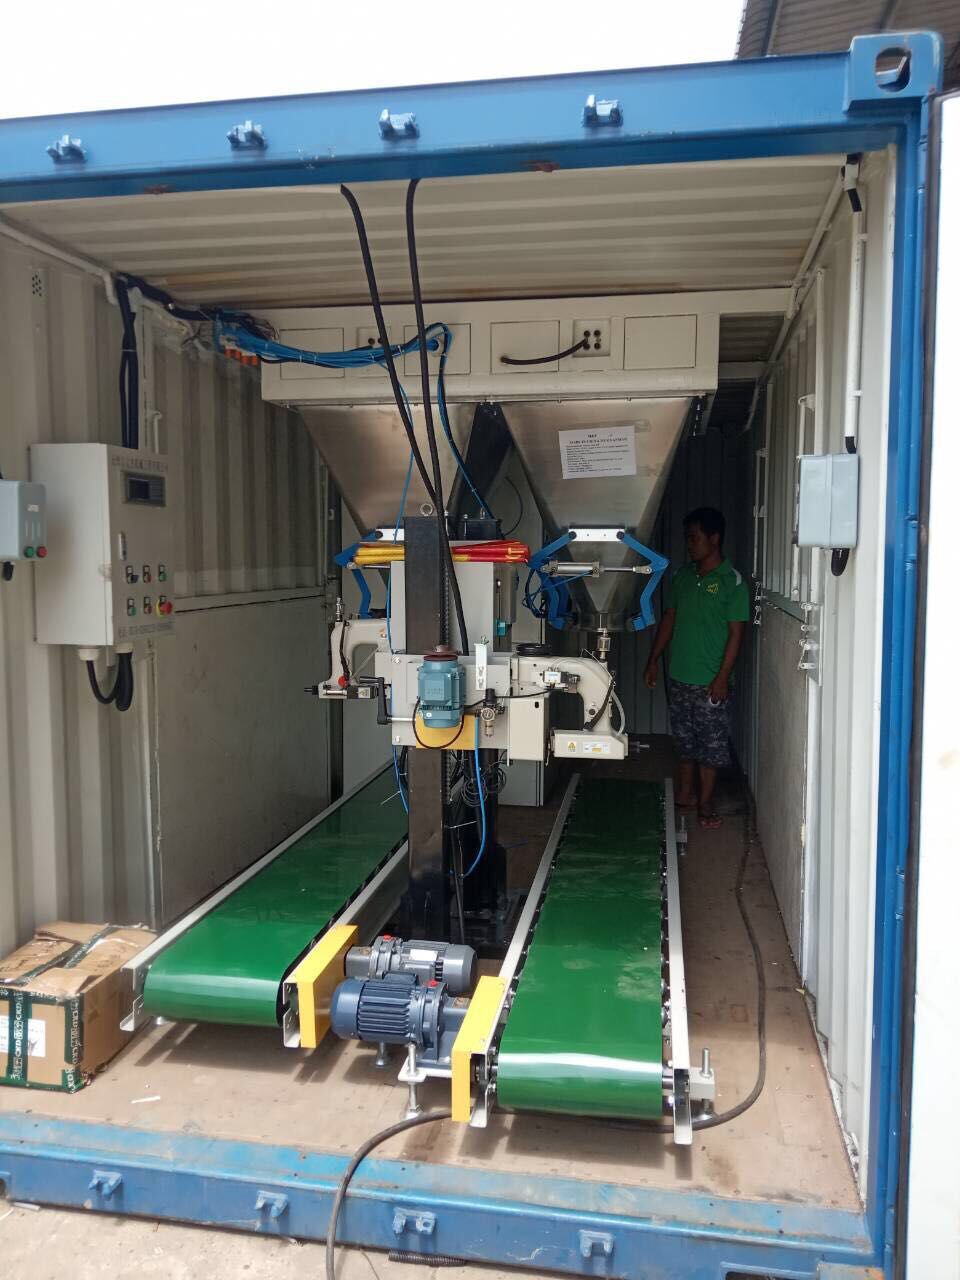 Waste Disposal Plants bagging system Flour filling machine Rice Mills packing machine Feed Plants packaging machine Pelleting Mills bagging machine Biomass bagging machines Hops bagger Chemicals packa